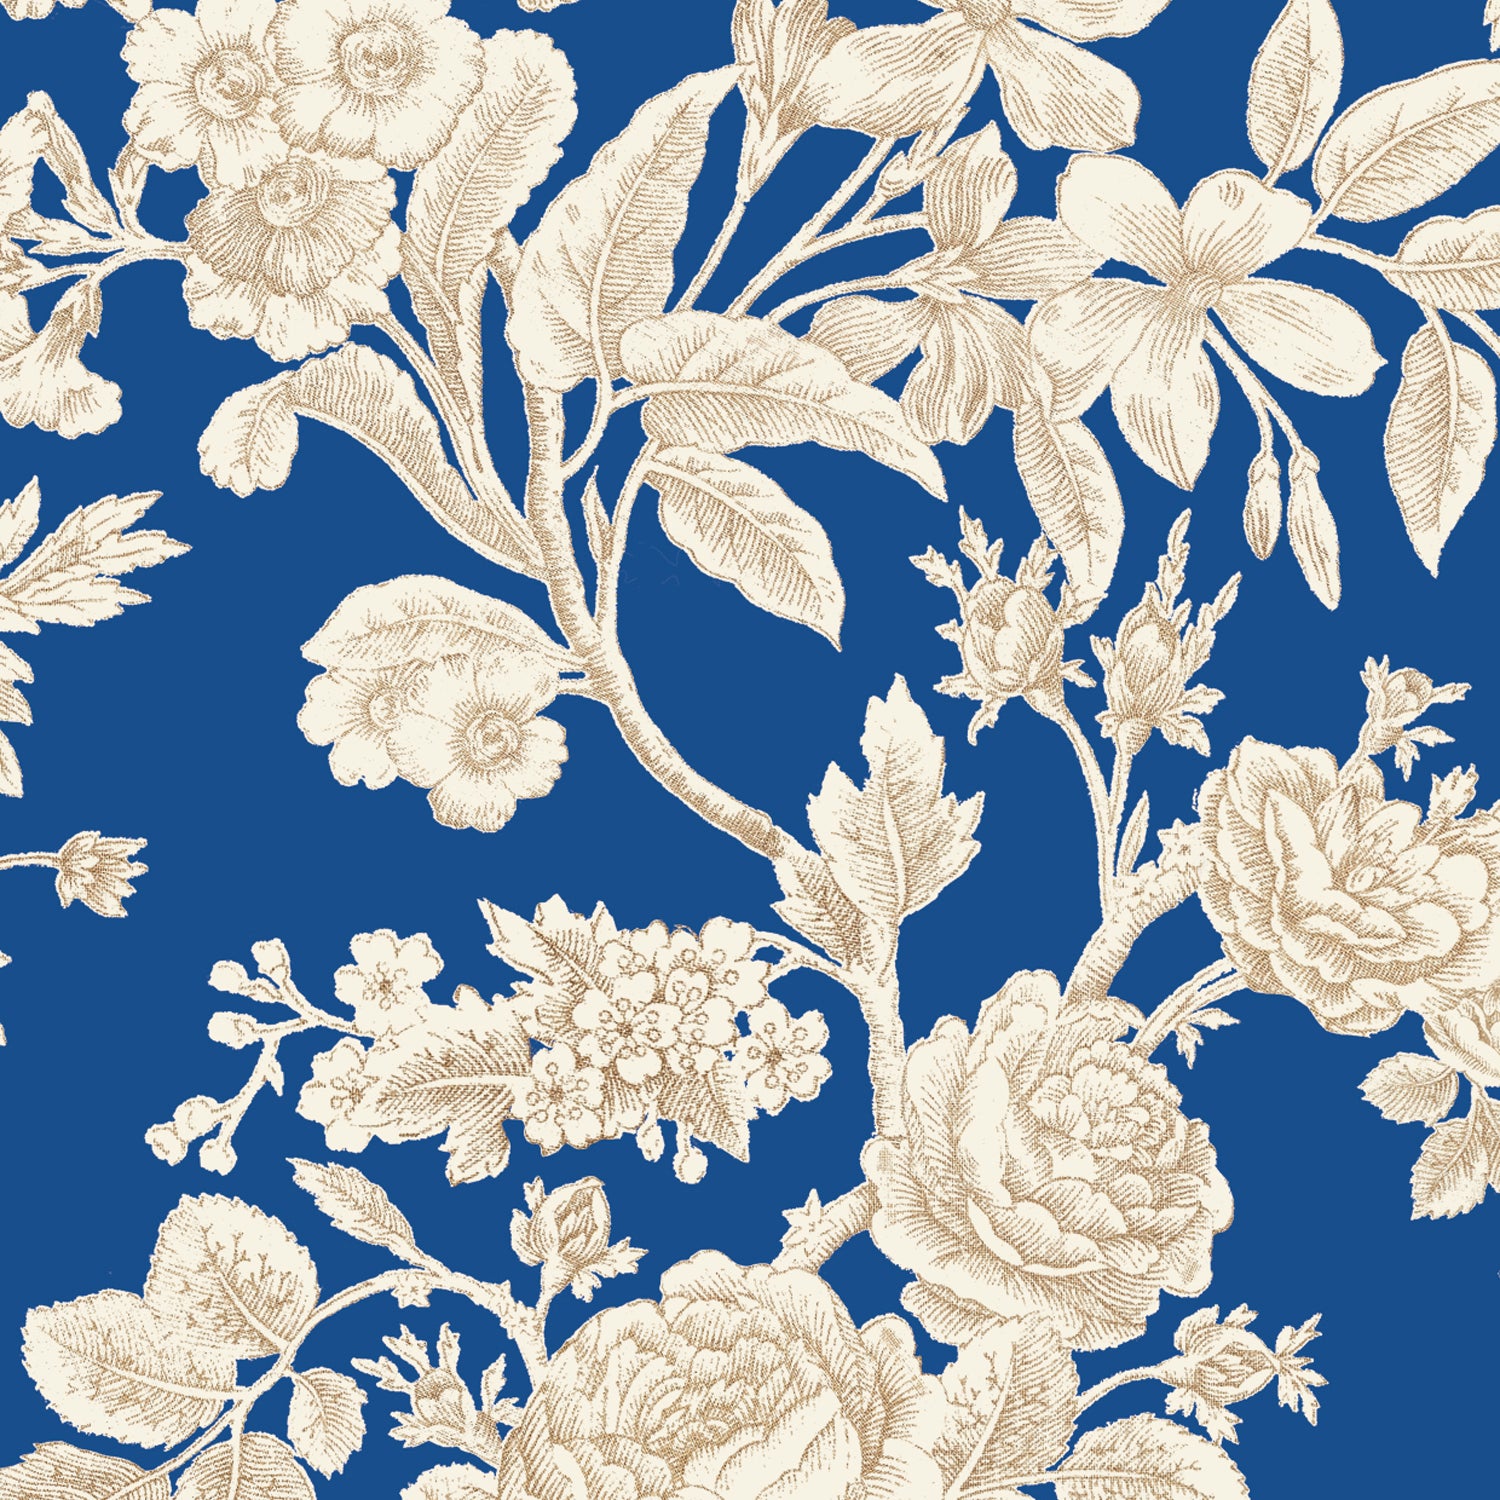 Detail of wallpaper in a classic floral print in tan and white on a navy field.